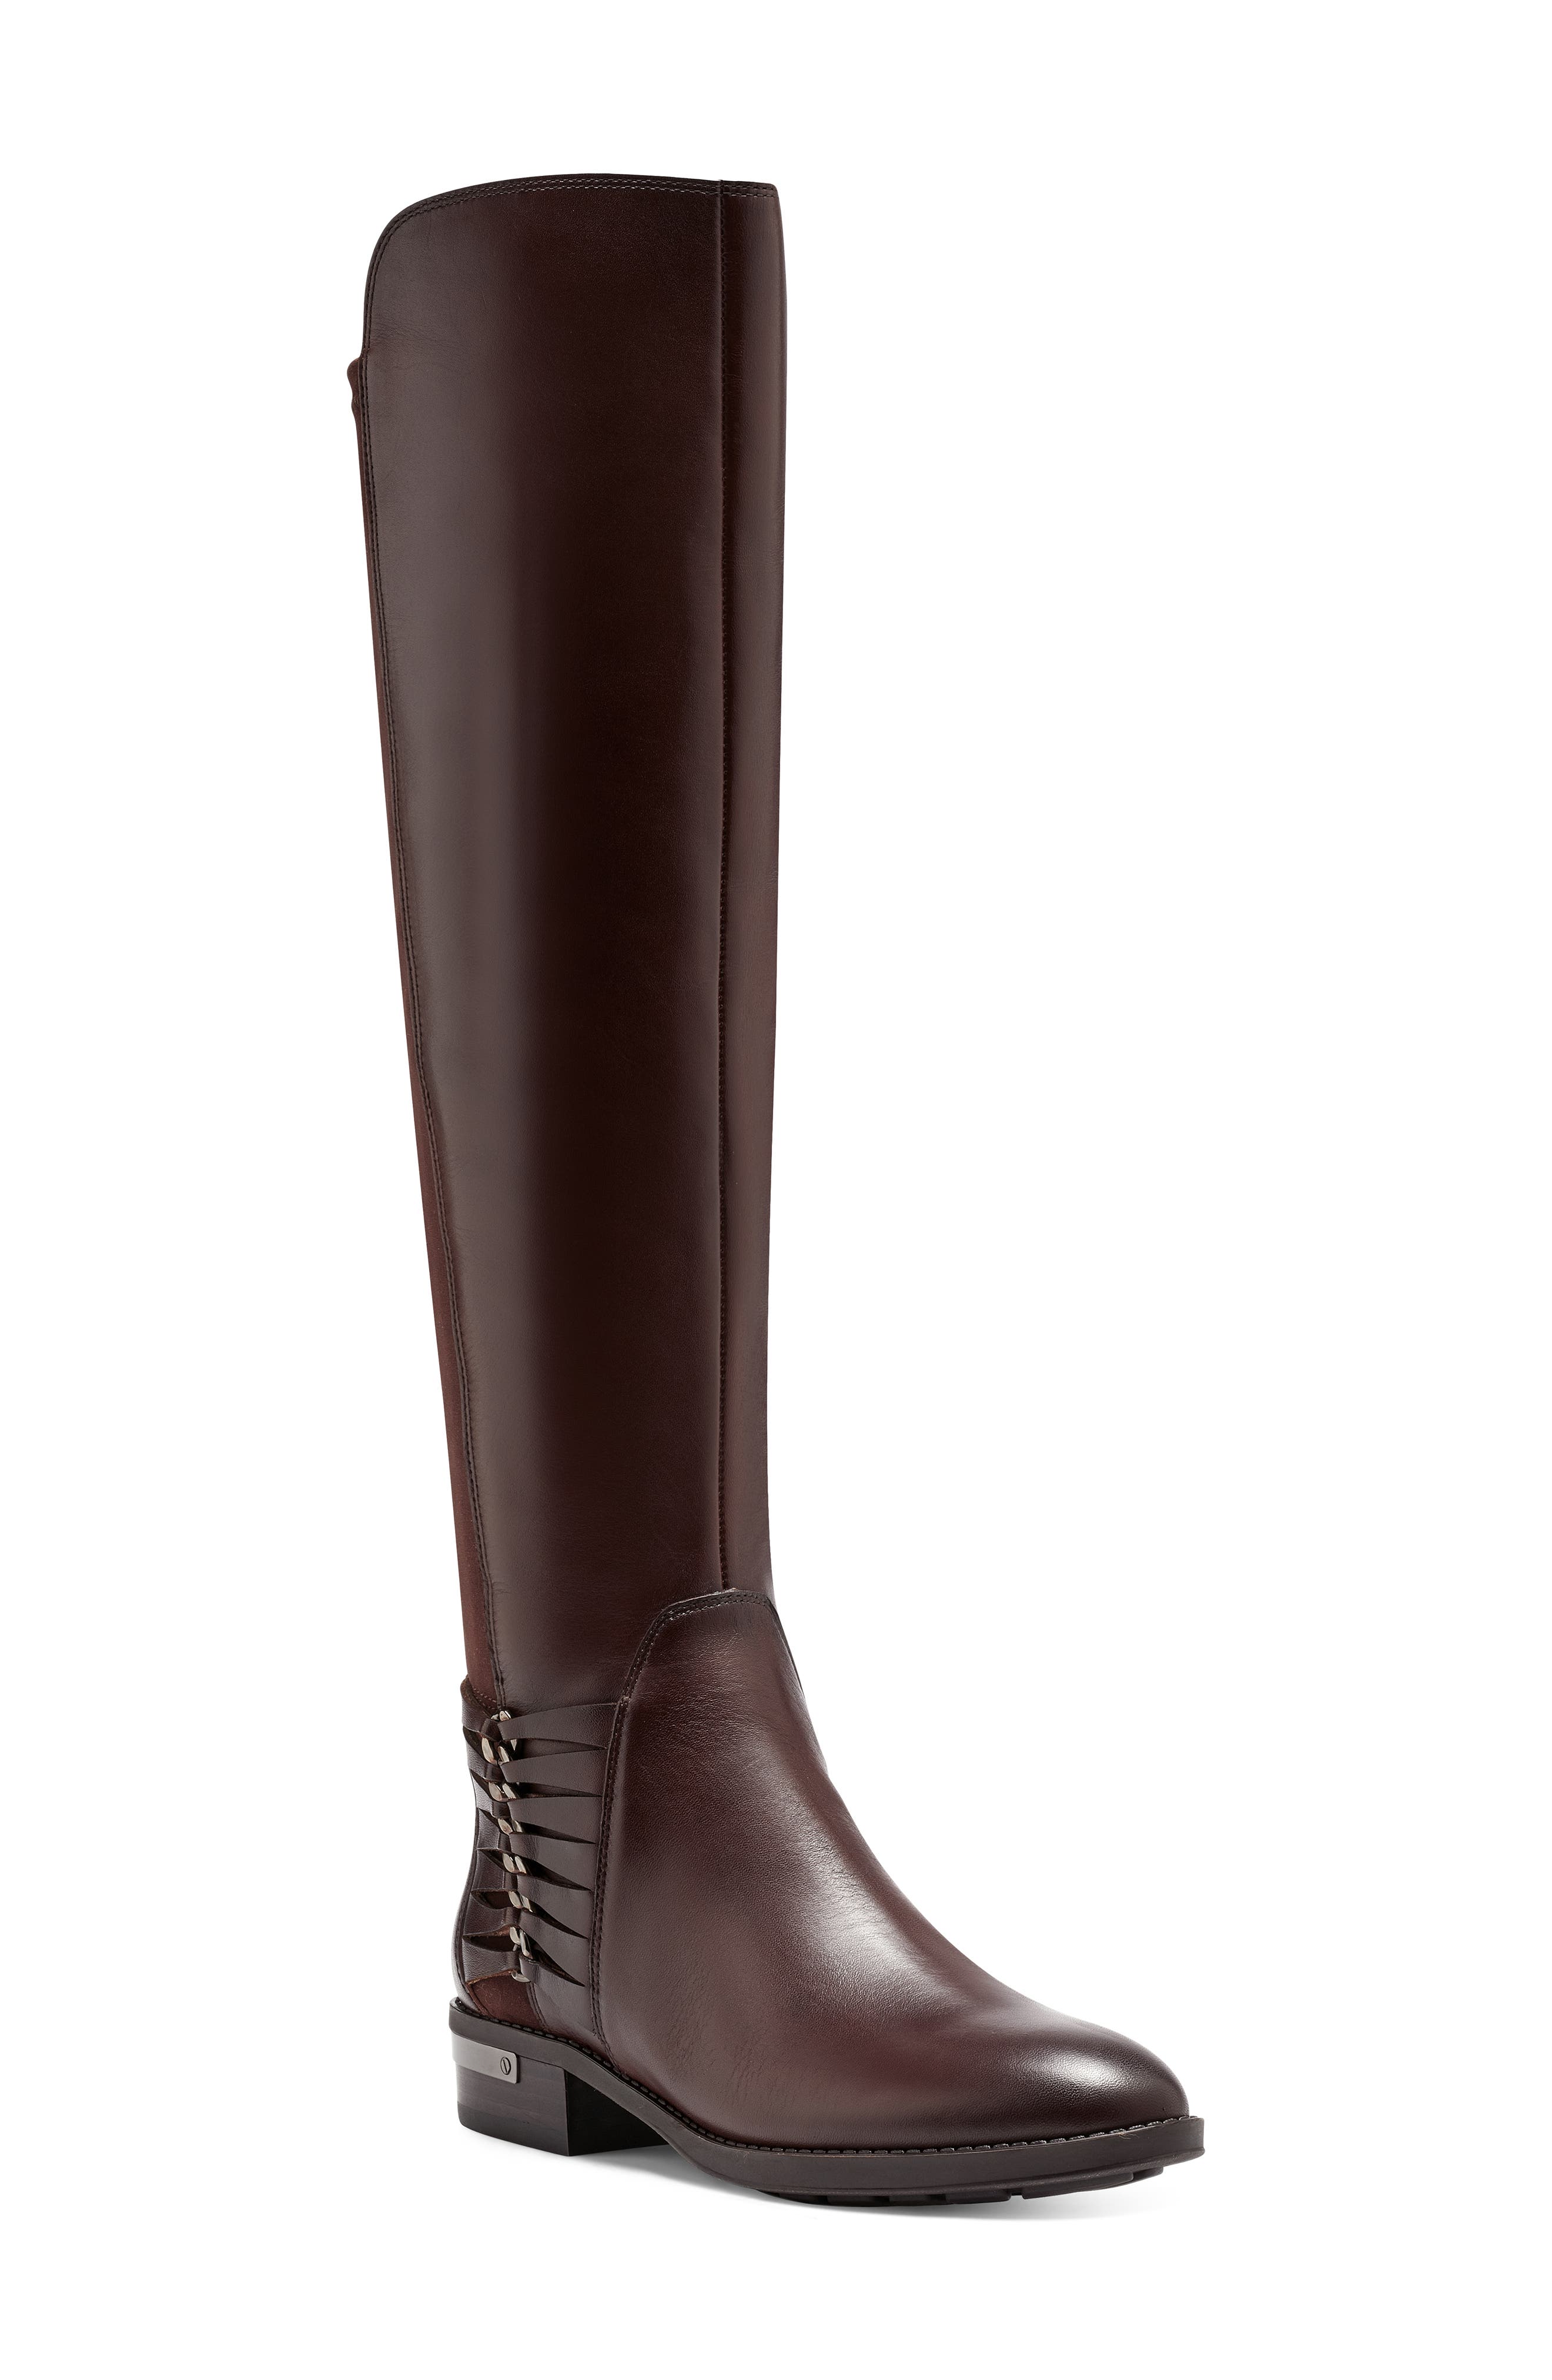 marcel corseted knee high boot